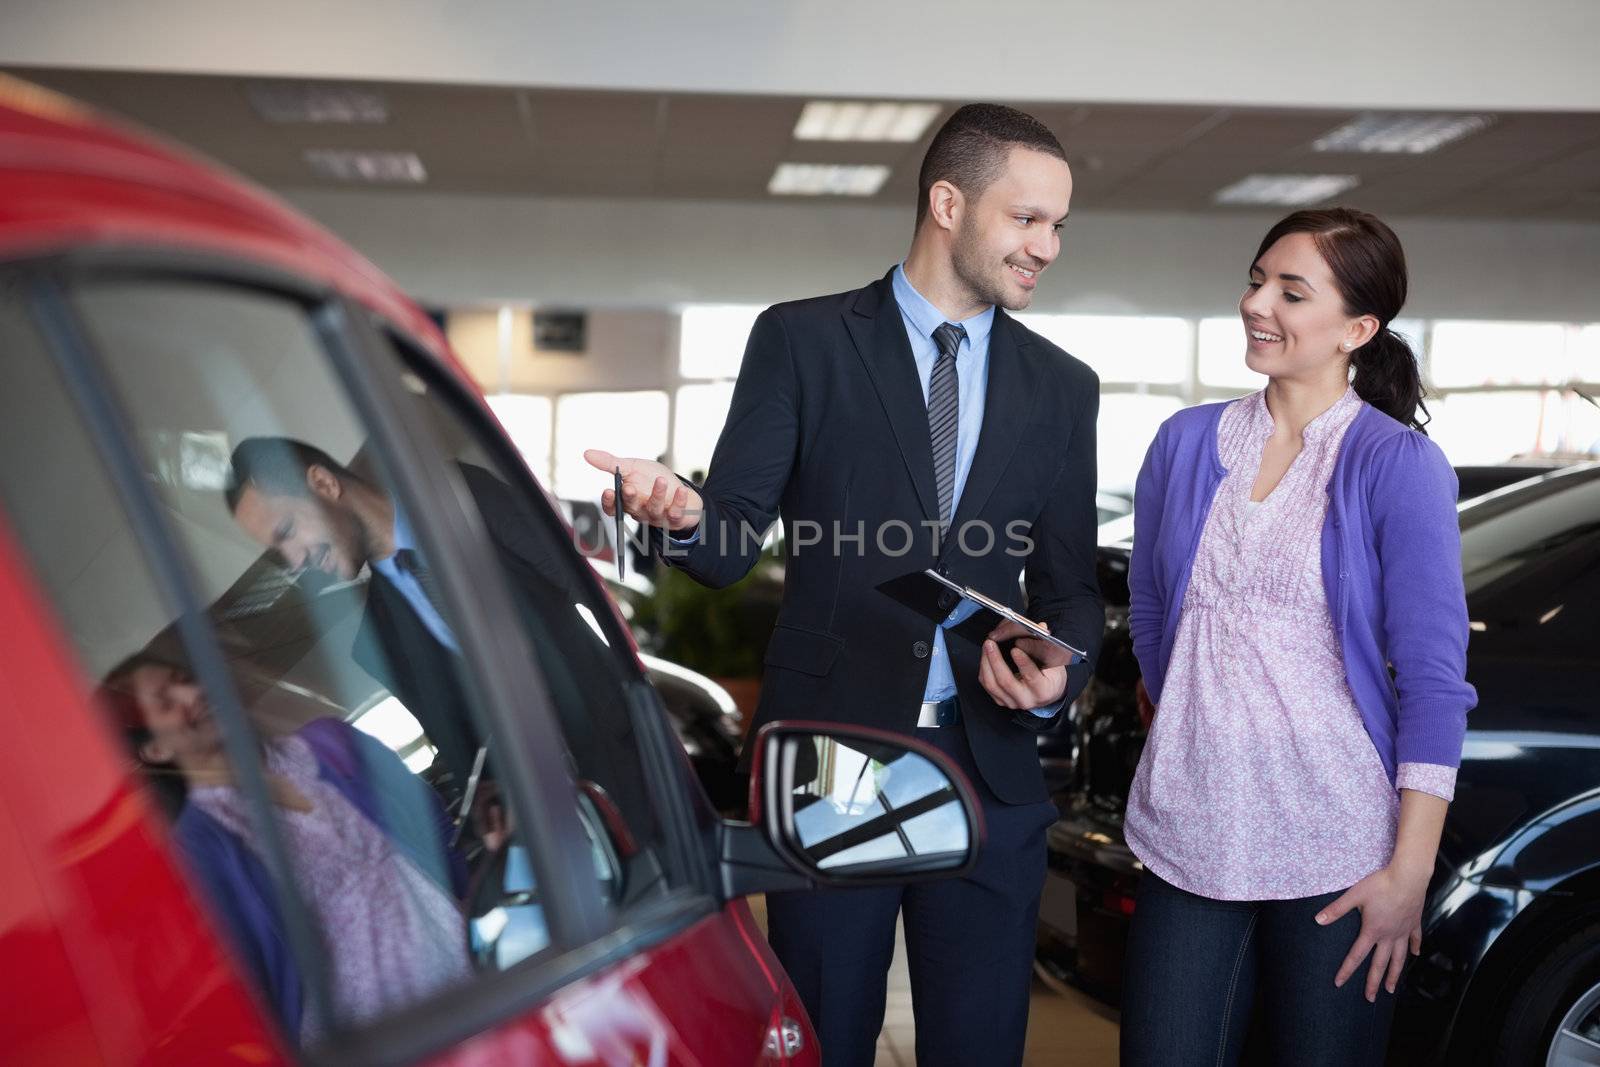 Salesman showing a car to a woman in a car shop